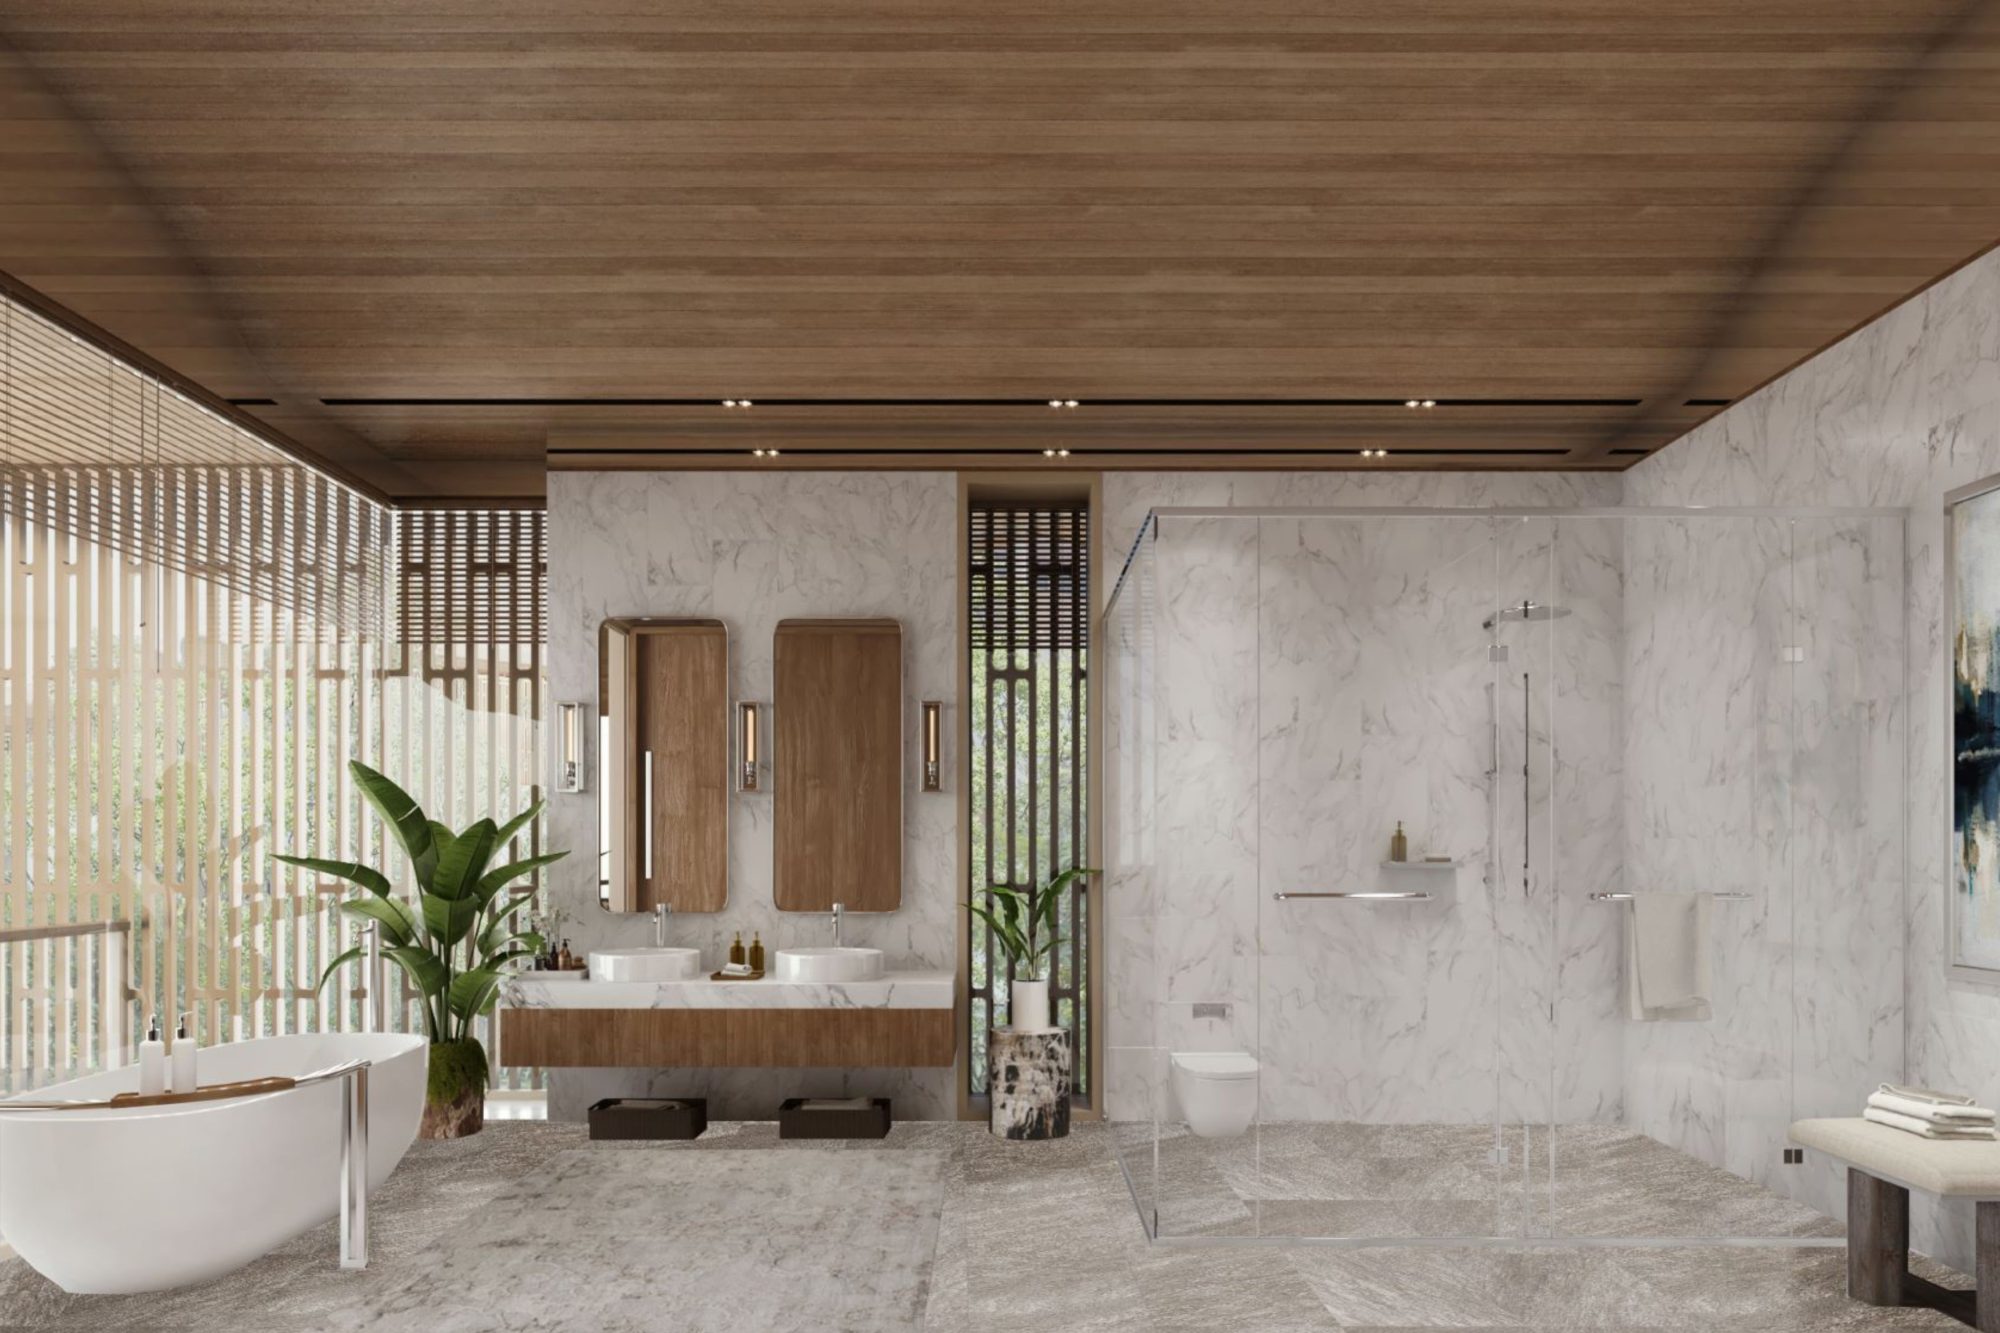 Six Senses The Forestias is an emerging eden in the heart of Bangkok